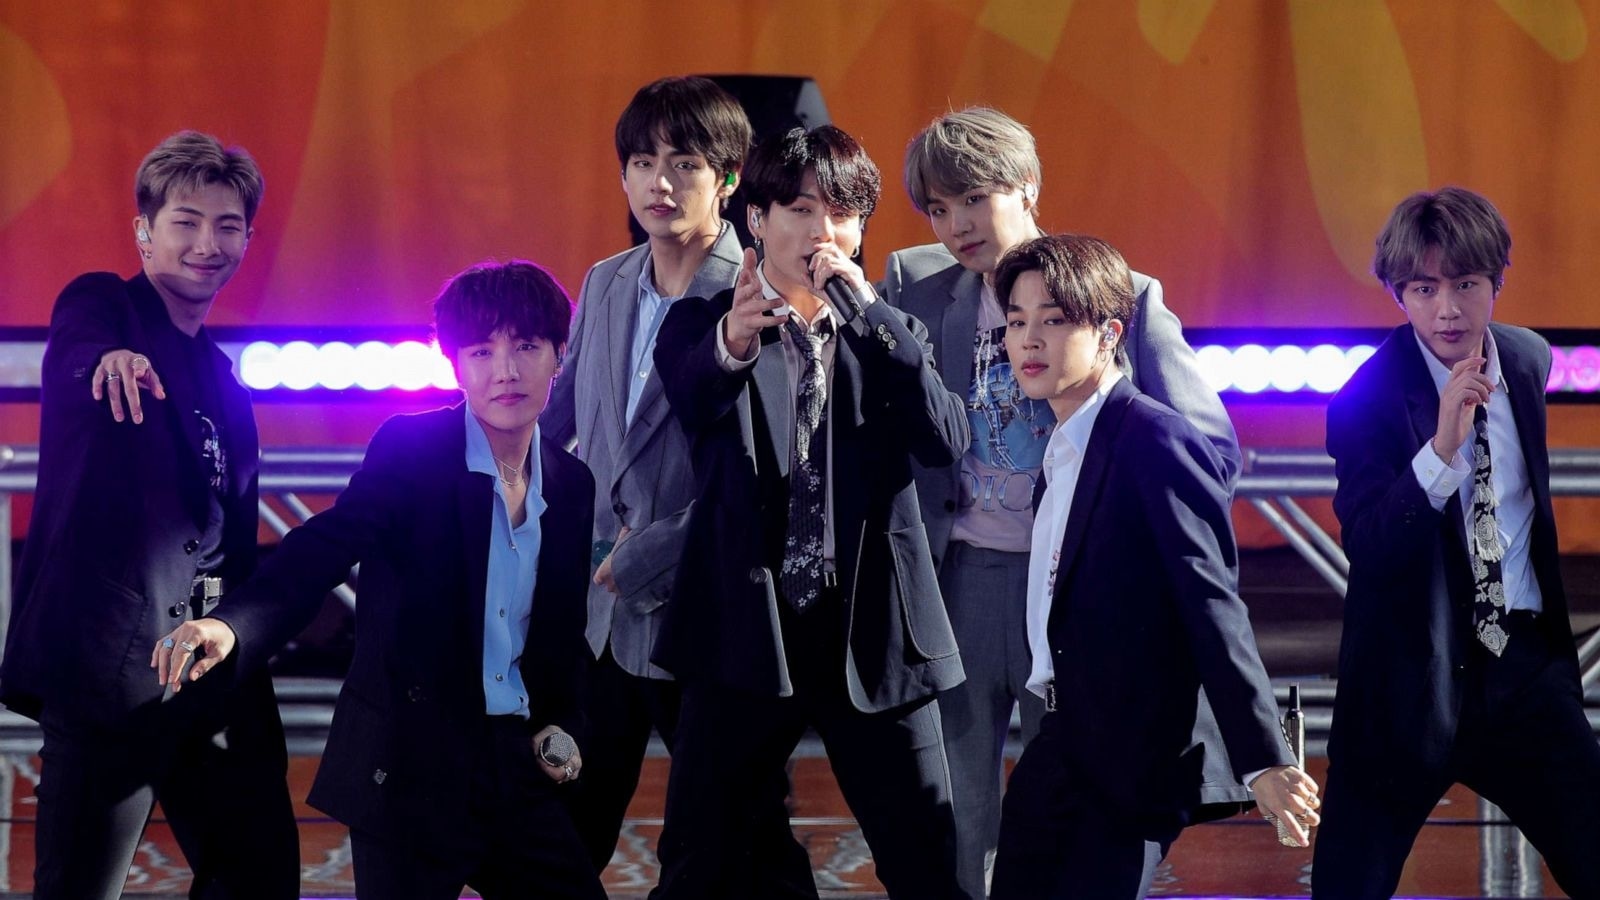 If you miss seeing BTS live in concert, their MMA performance will cheer you up. Here's where you can see all the action at the Melon Music Awards.